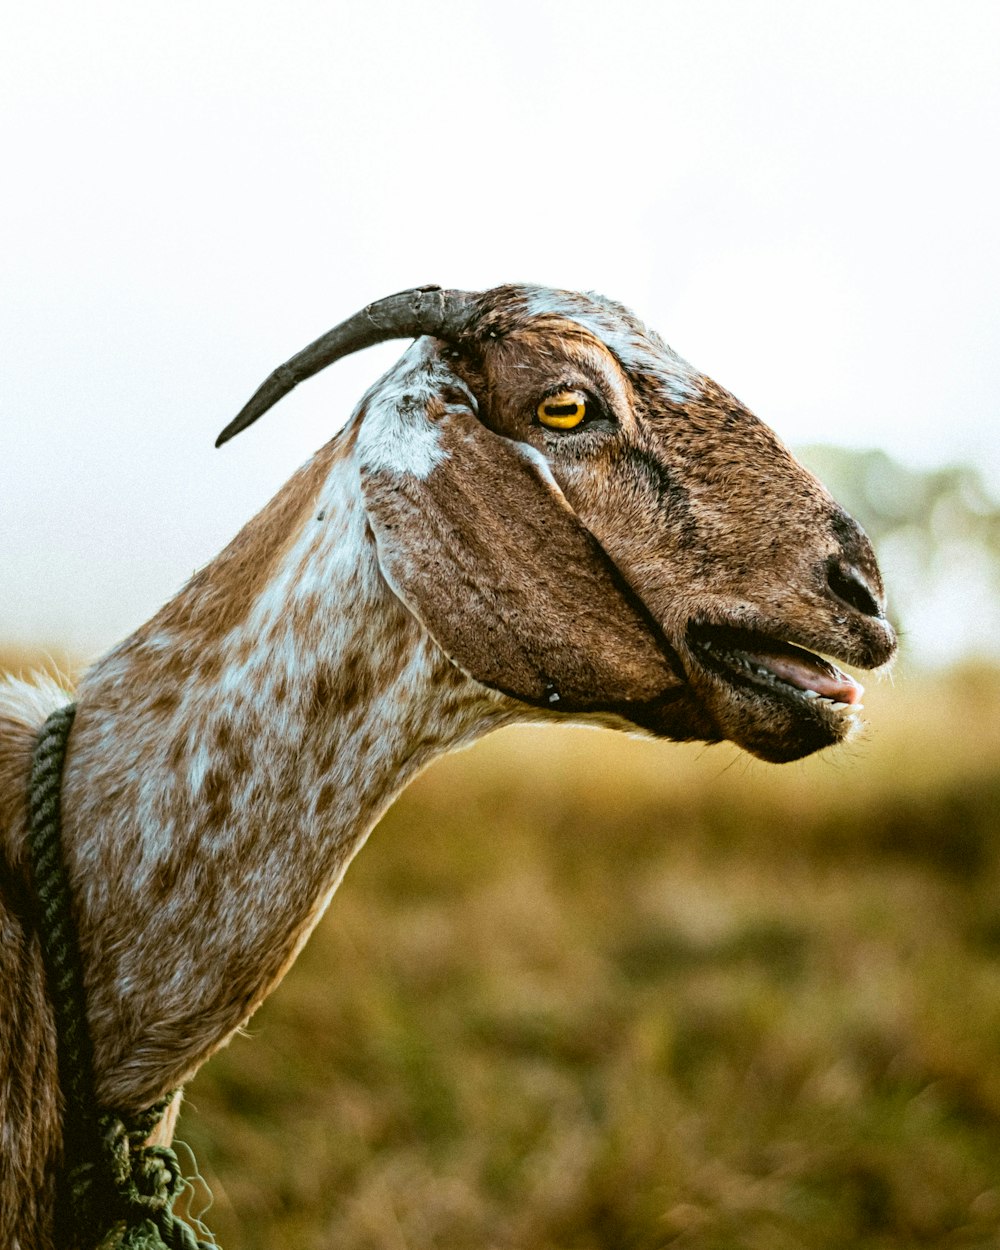 a close up of a goat's face in a field